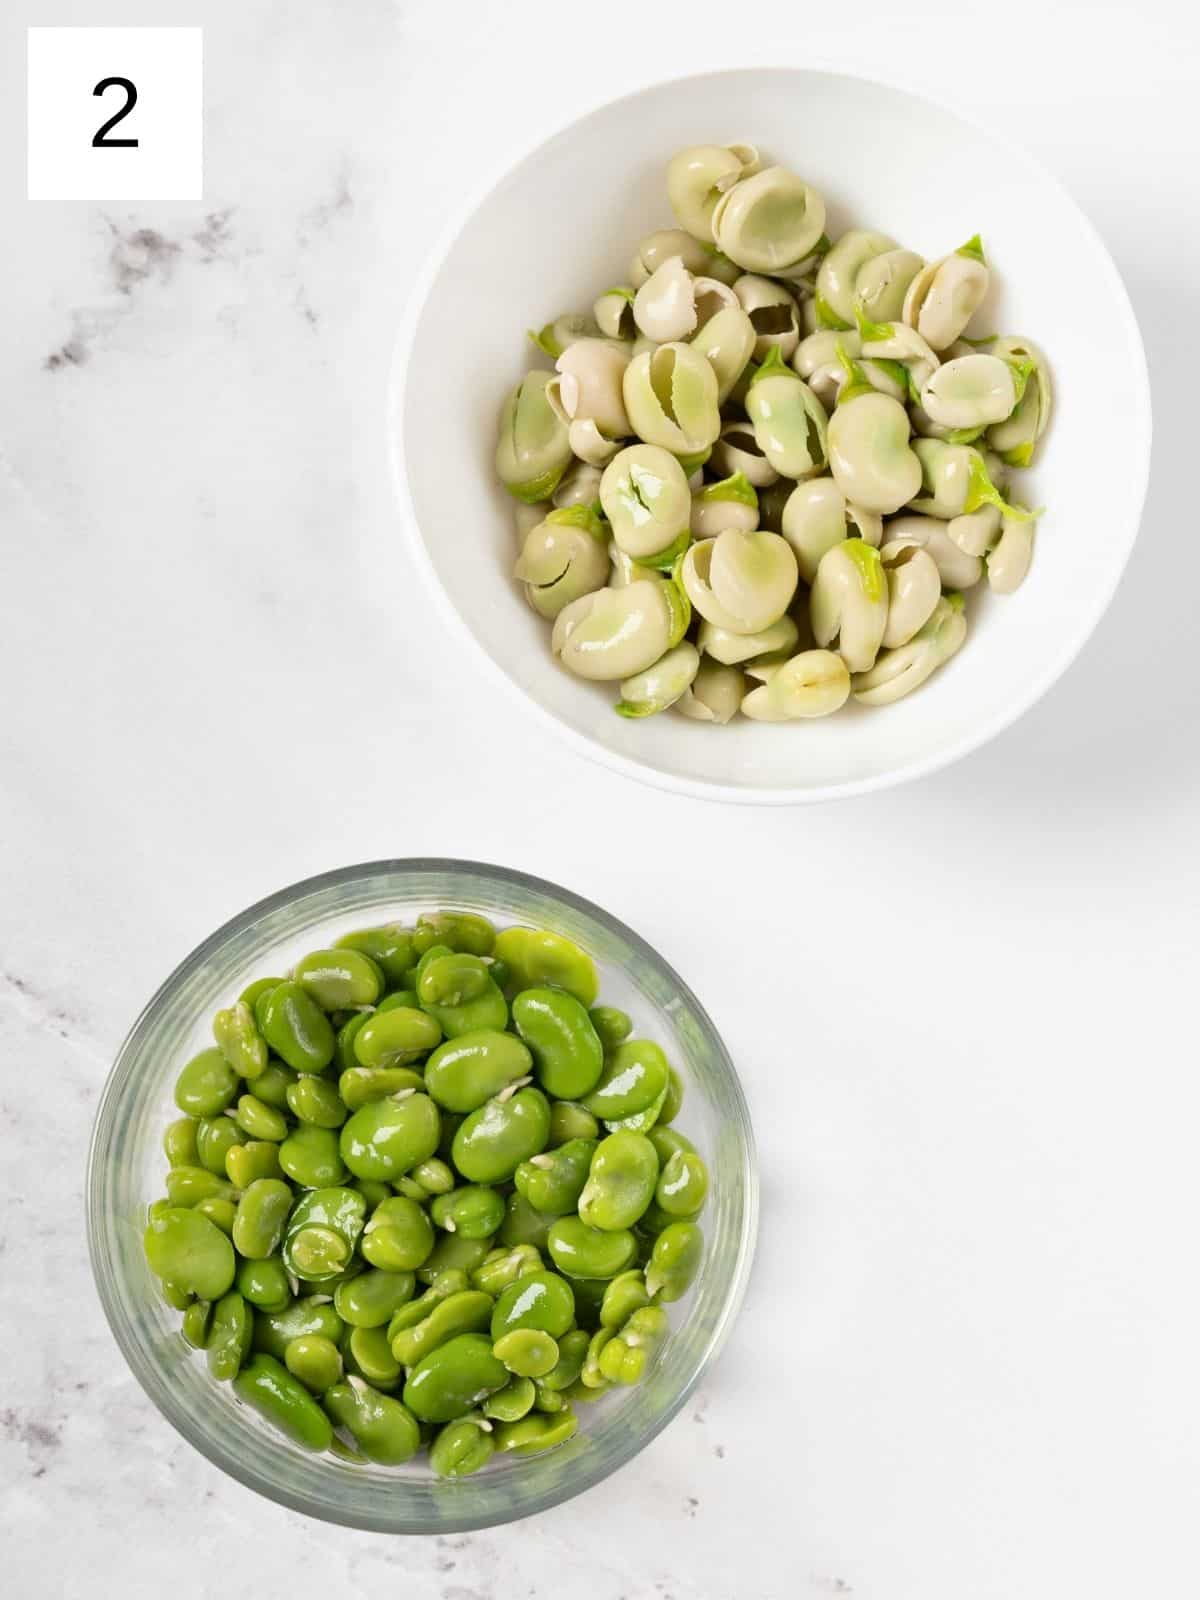 two separate bowls of fava beans and their pods.